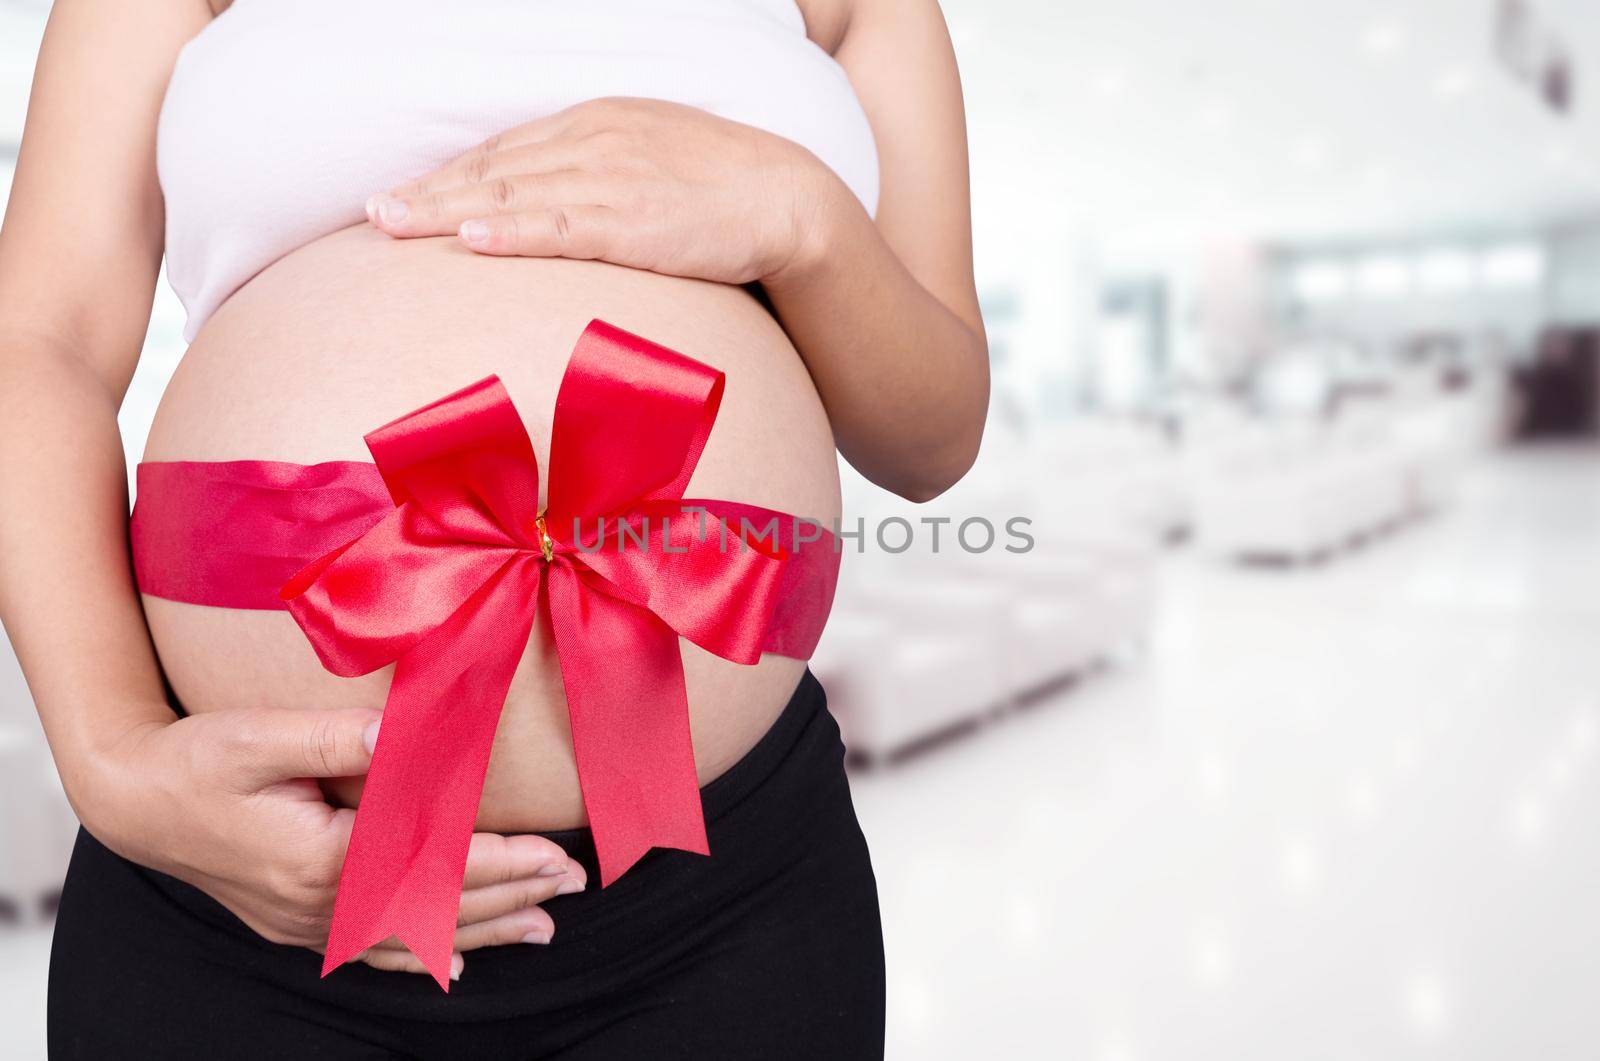 close up pregnant woman with red ribbon gift on belly in hospital background by geargodz